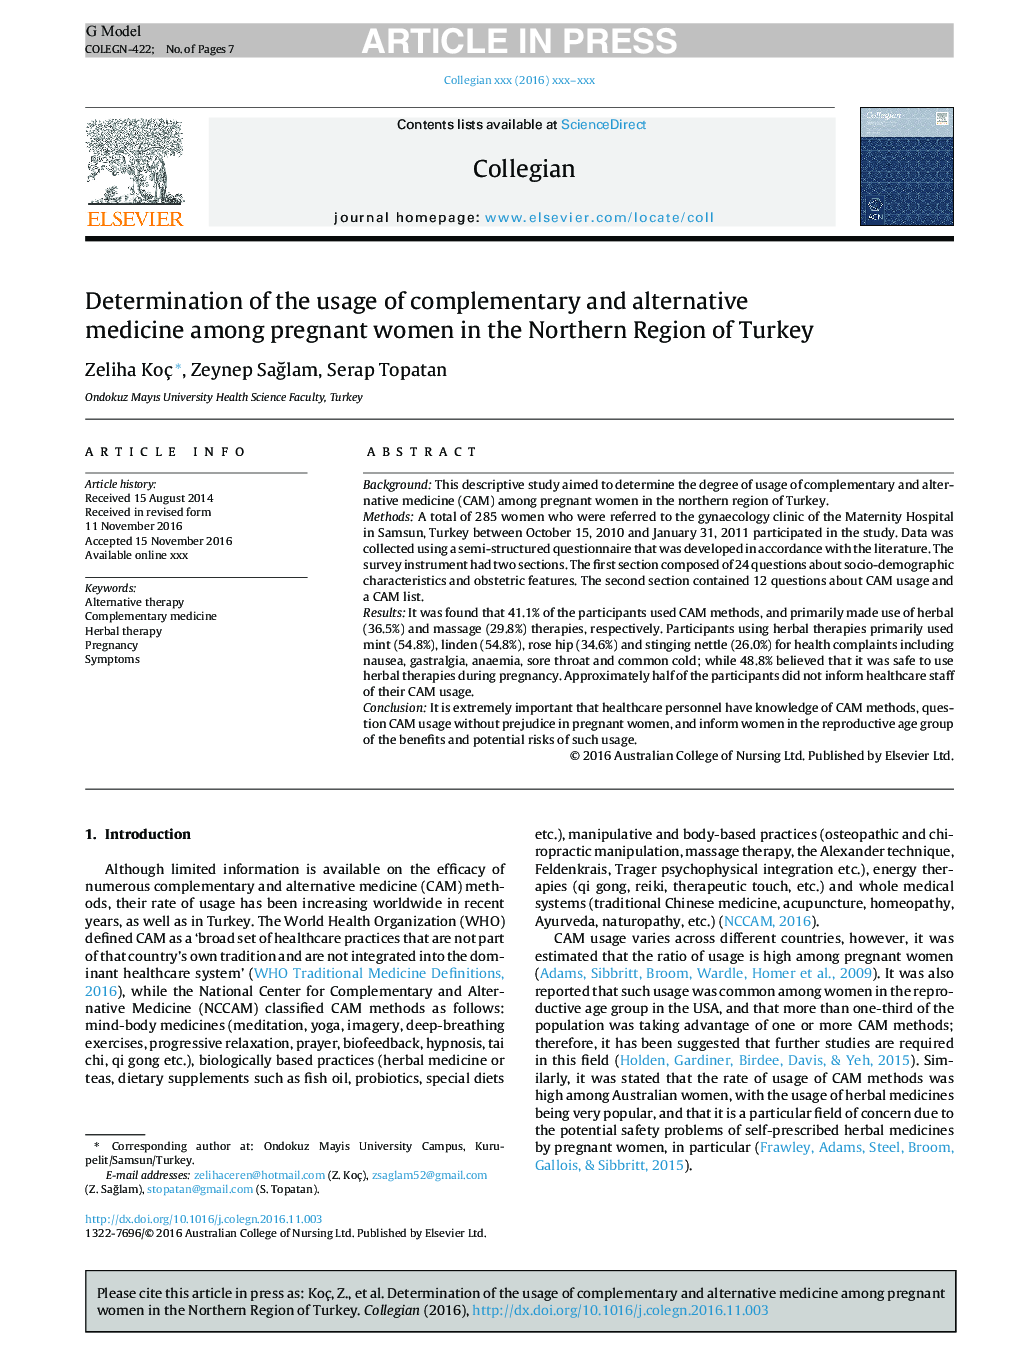 Determination of the usage of complementary and alternative medicine among pregnant women in the Northern Region of Turkey